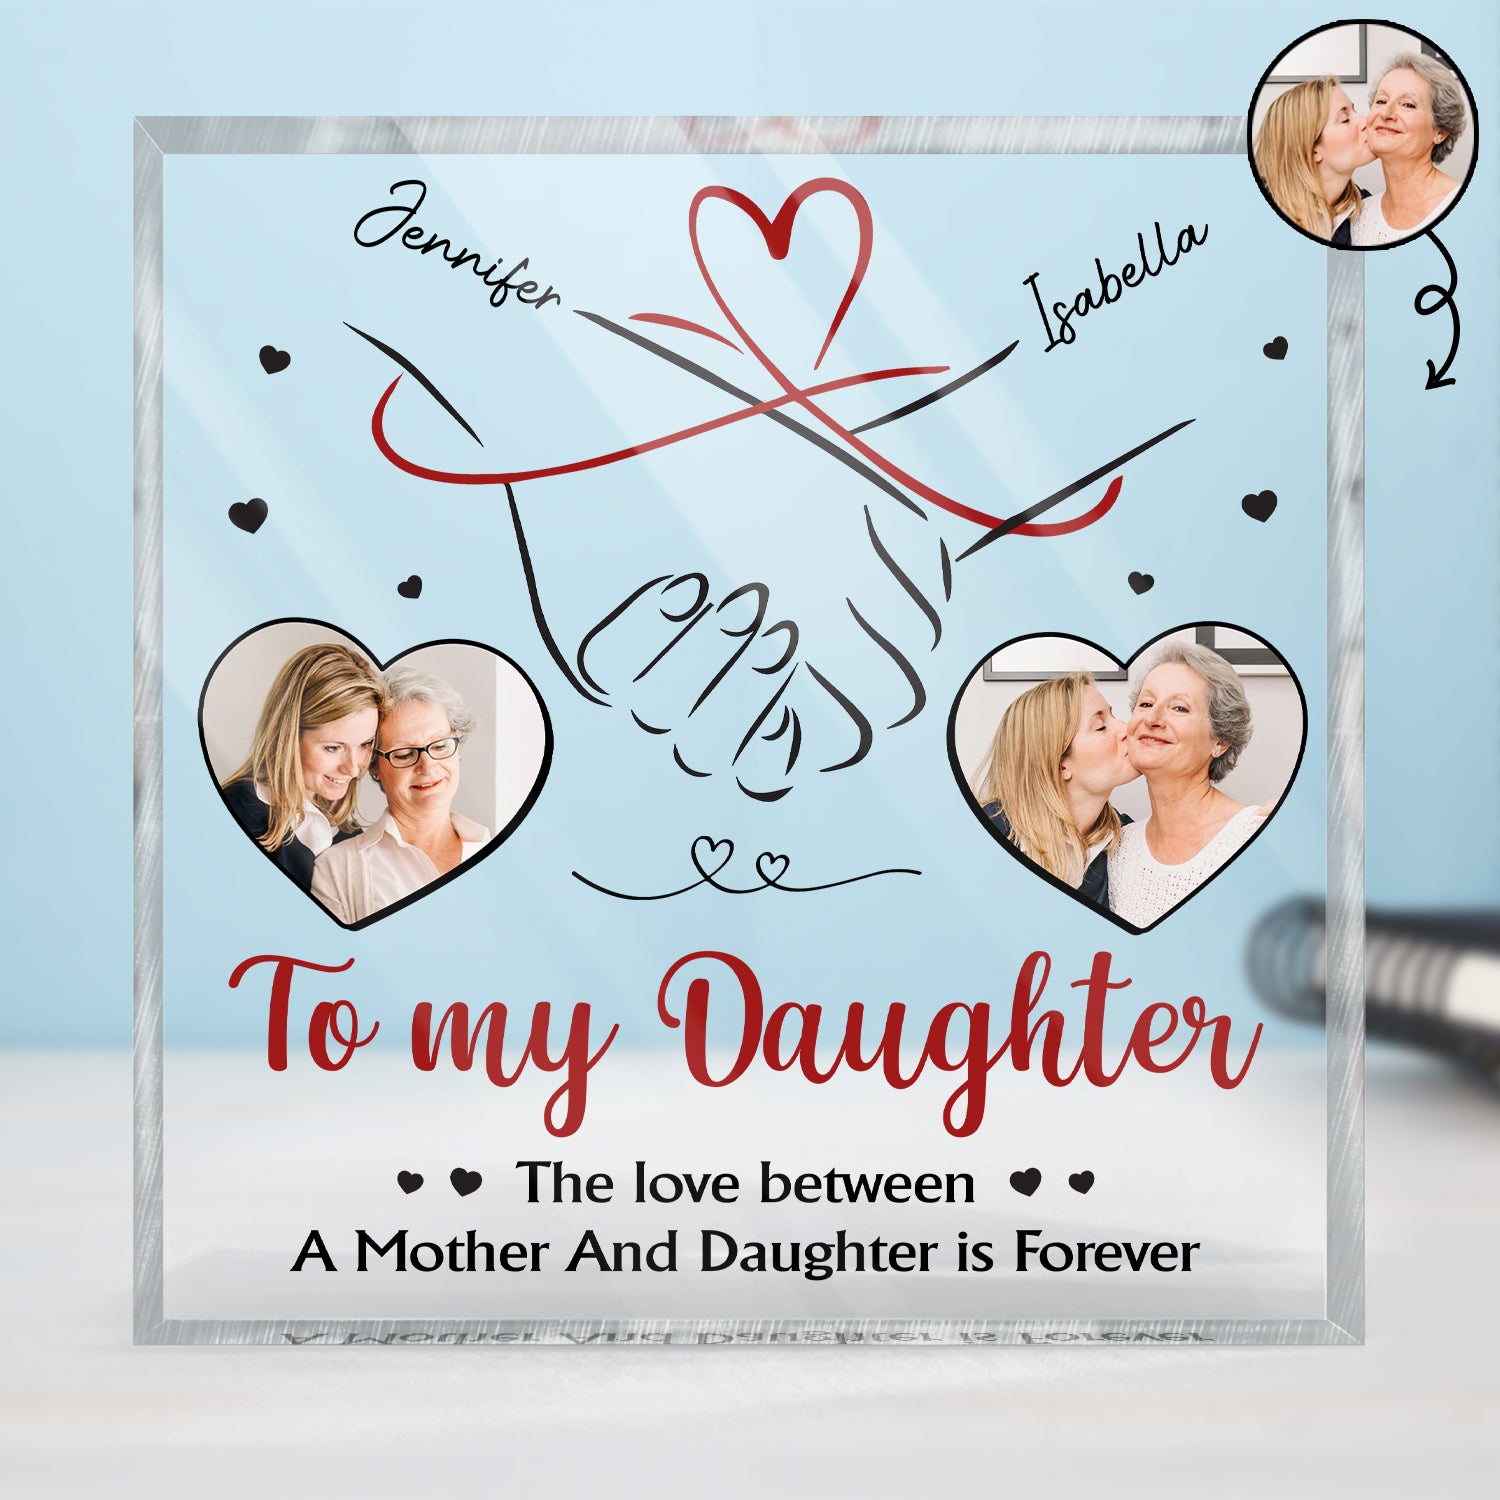 Custom Photo The Love Between Mother And Daughter - Gift For Daughter - Personalized Square Shaped Acrylic Plaque